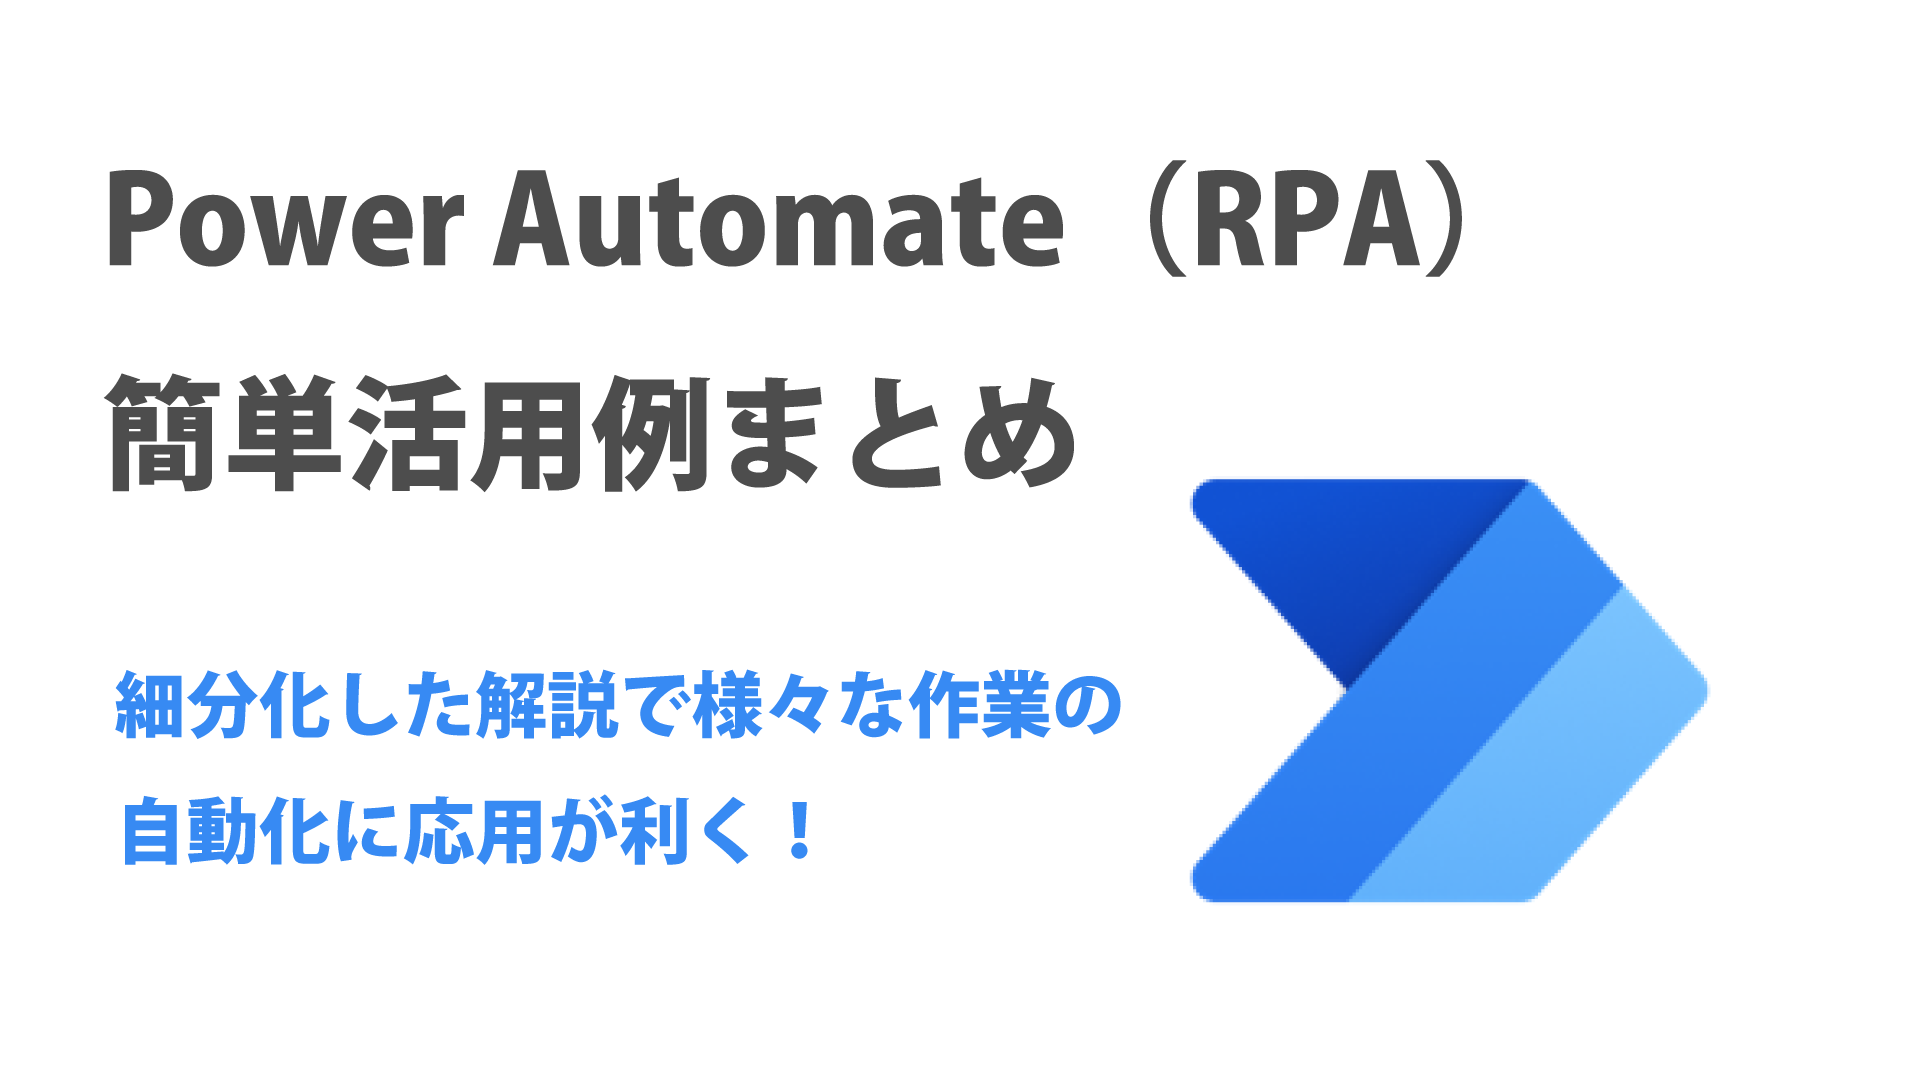 Power-Automate（RPA）簡単活用例まとめ！